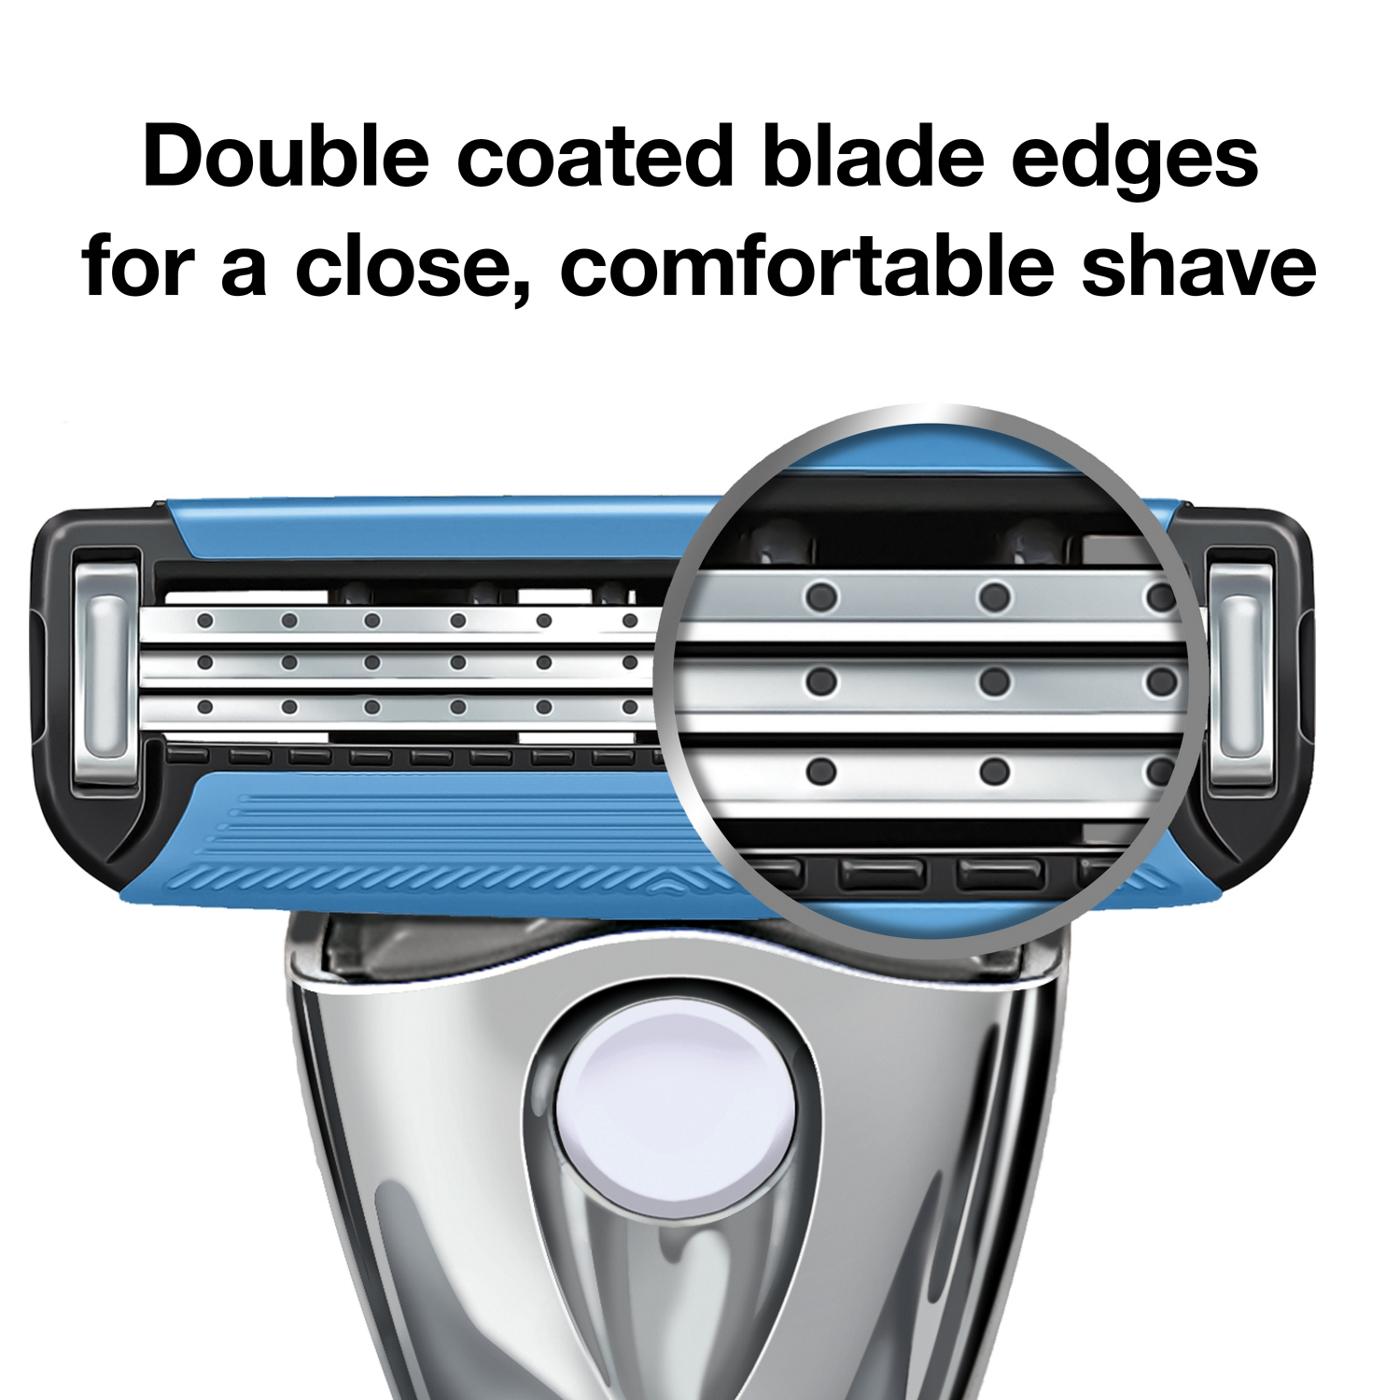 Hill Country Essentials Maxus3 Triple Blade Razor Value Pack with Refill Cartridges; image 3 of 5